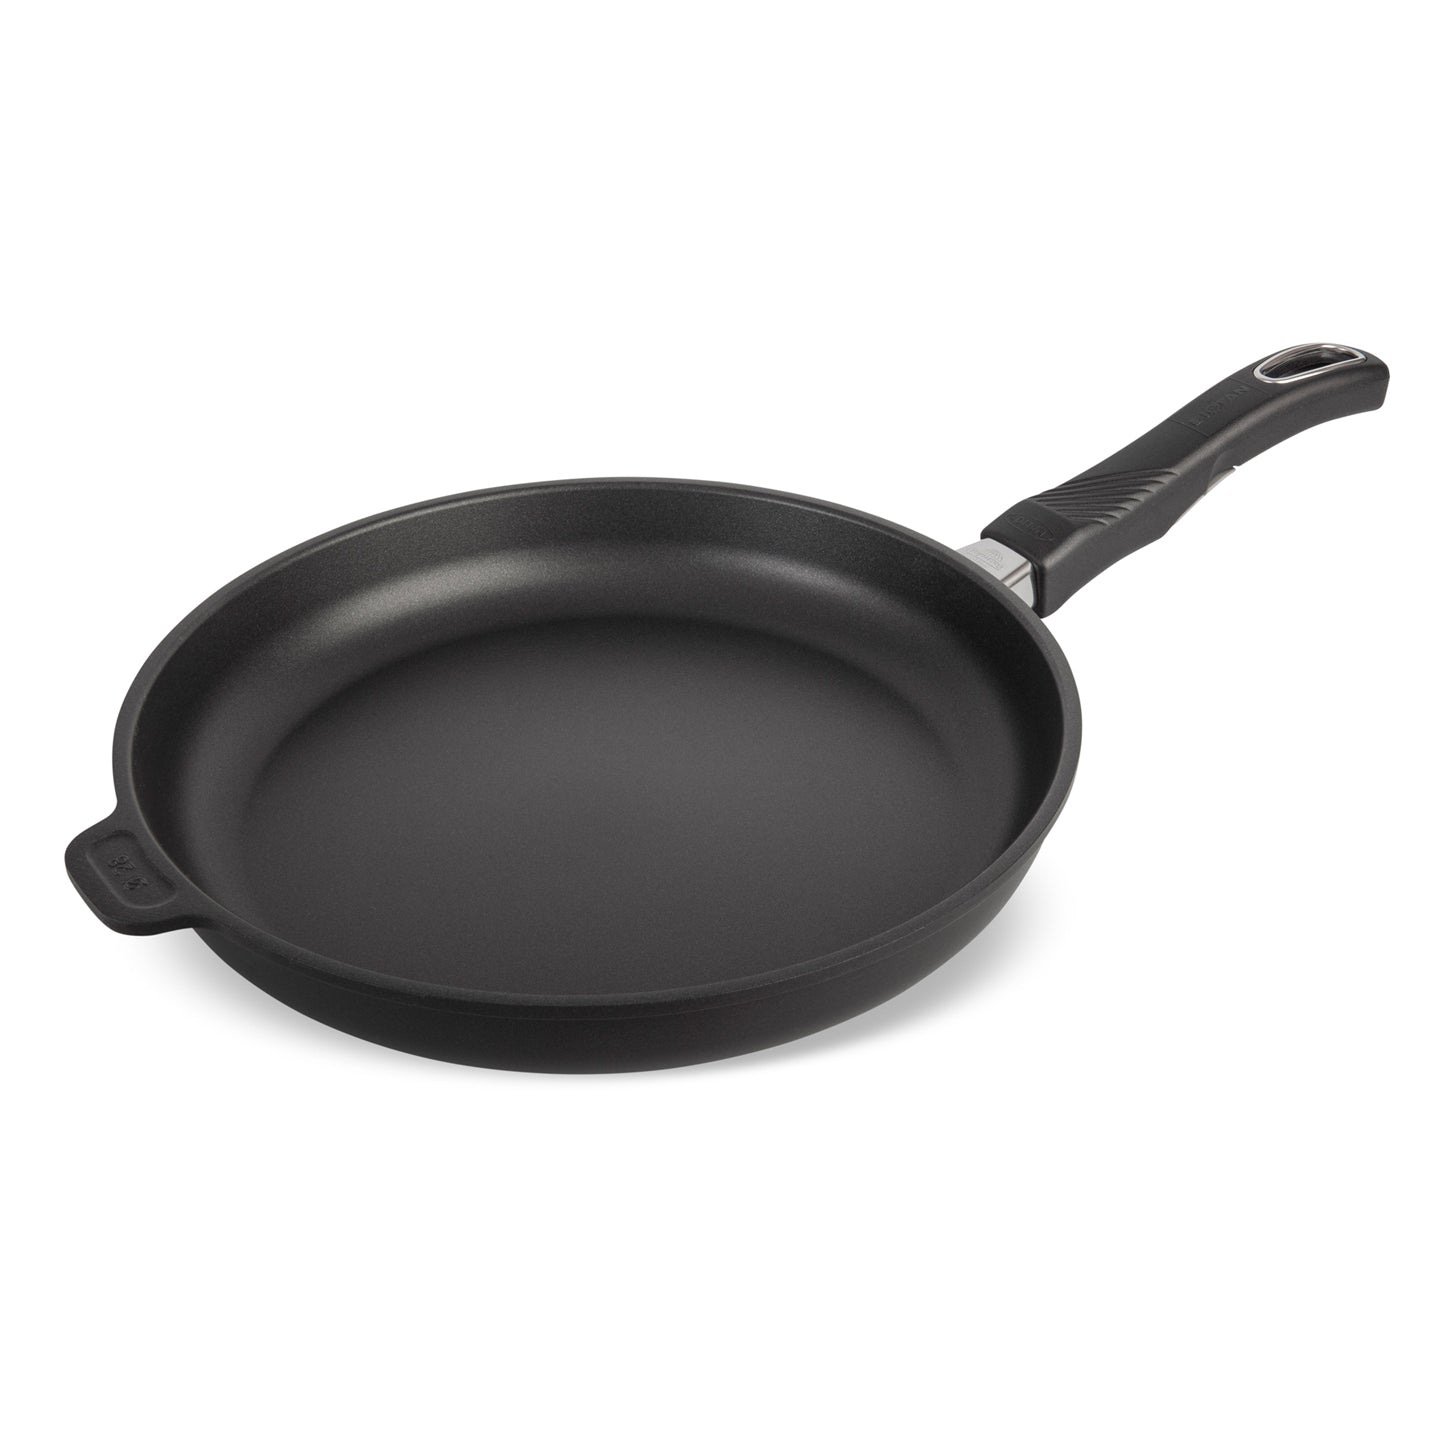 Gastrolux Non-Stick Frying Pan